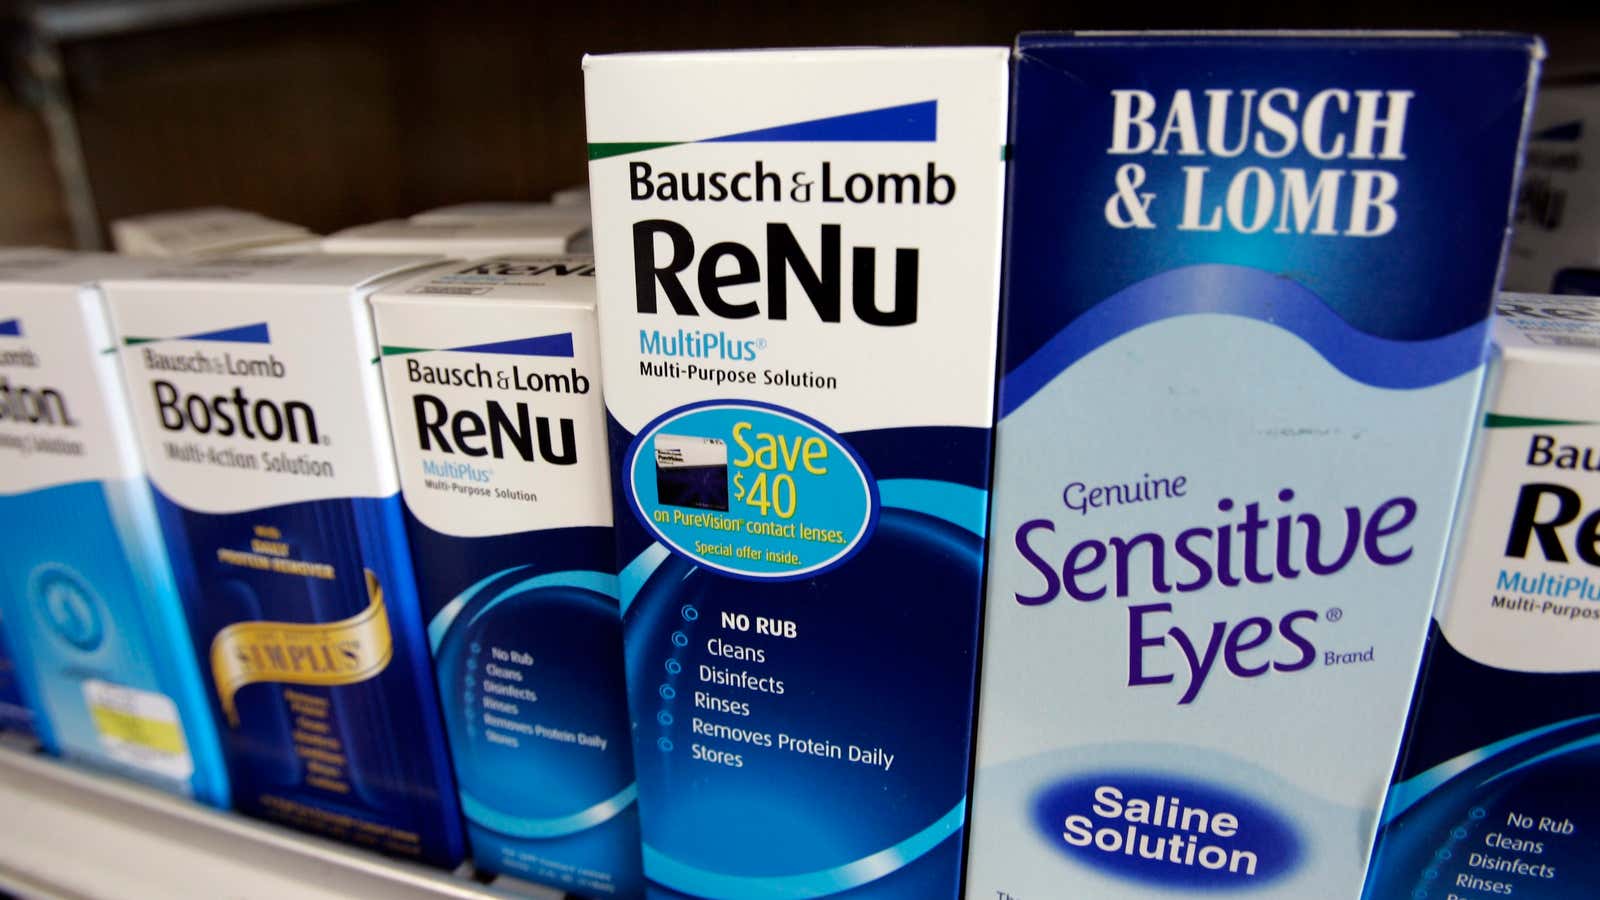 Bausch &amp; Lomb could be another hot IPO for private equity